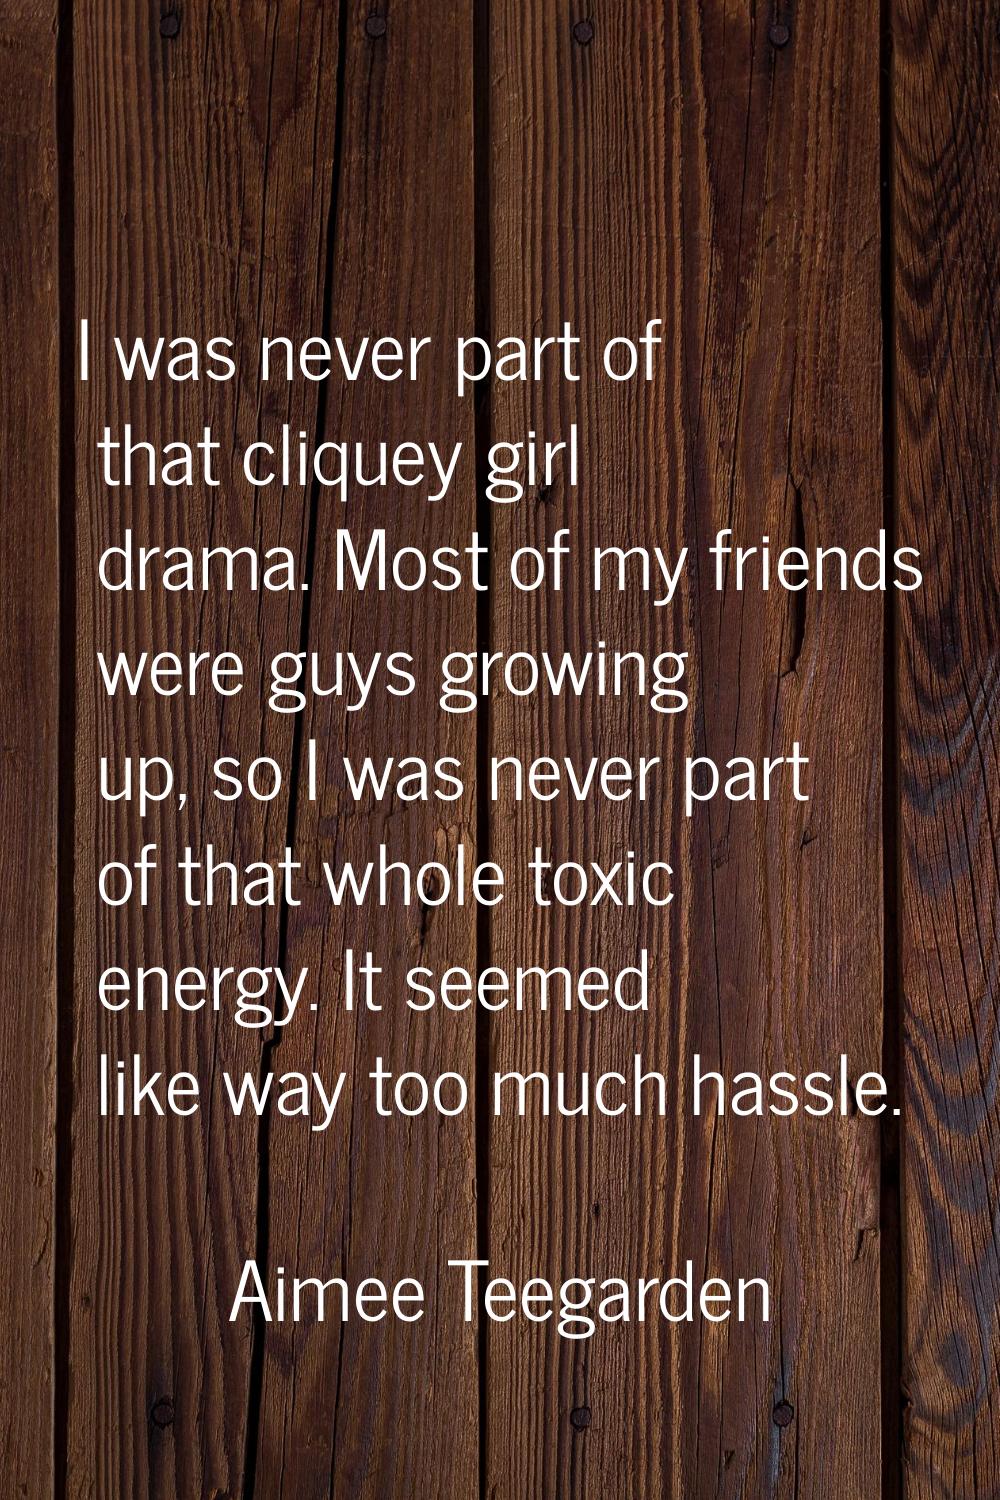 I was never part of that cliquey girl drama. Most of my friends were guys growing up, so I was neve